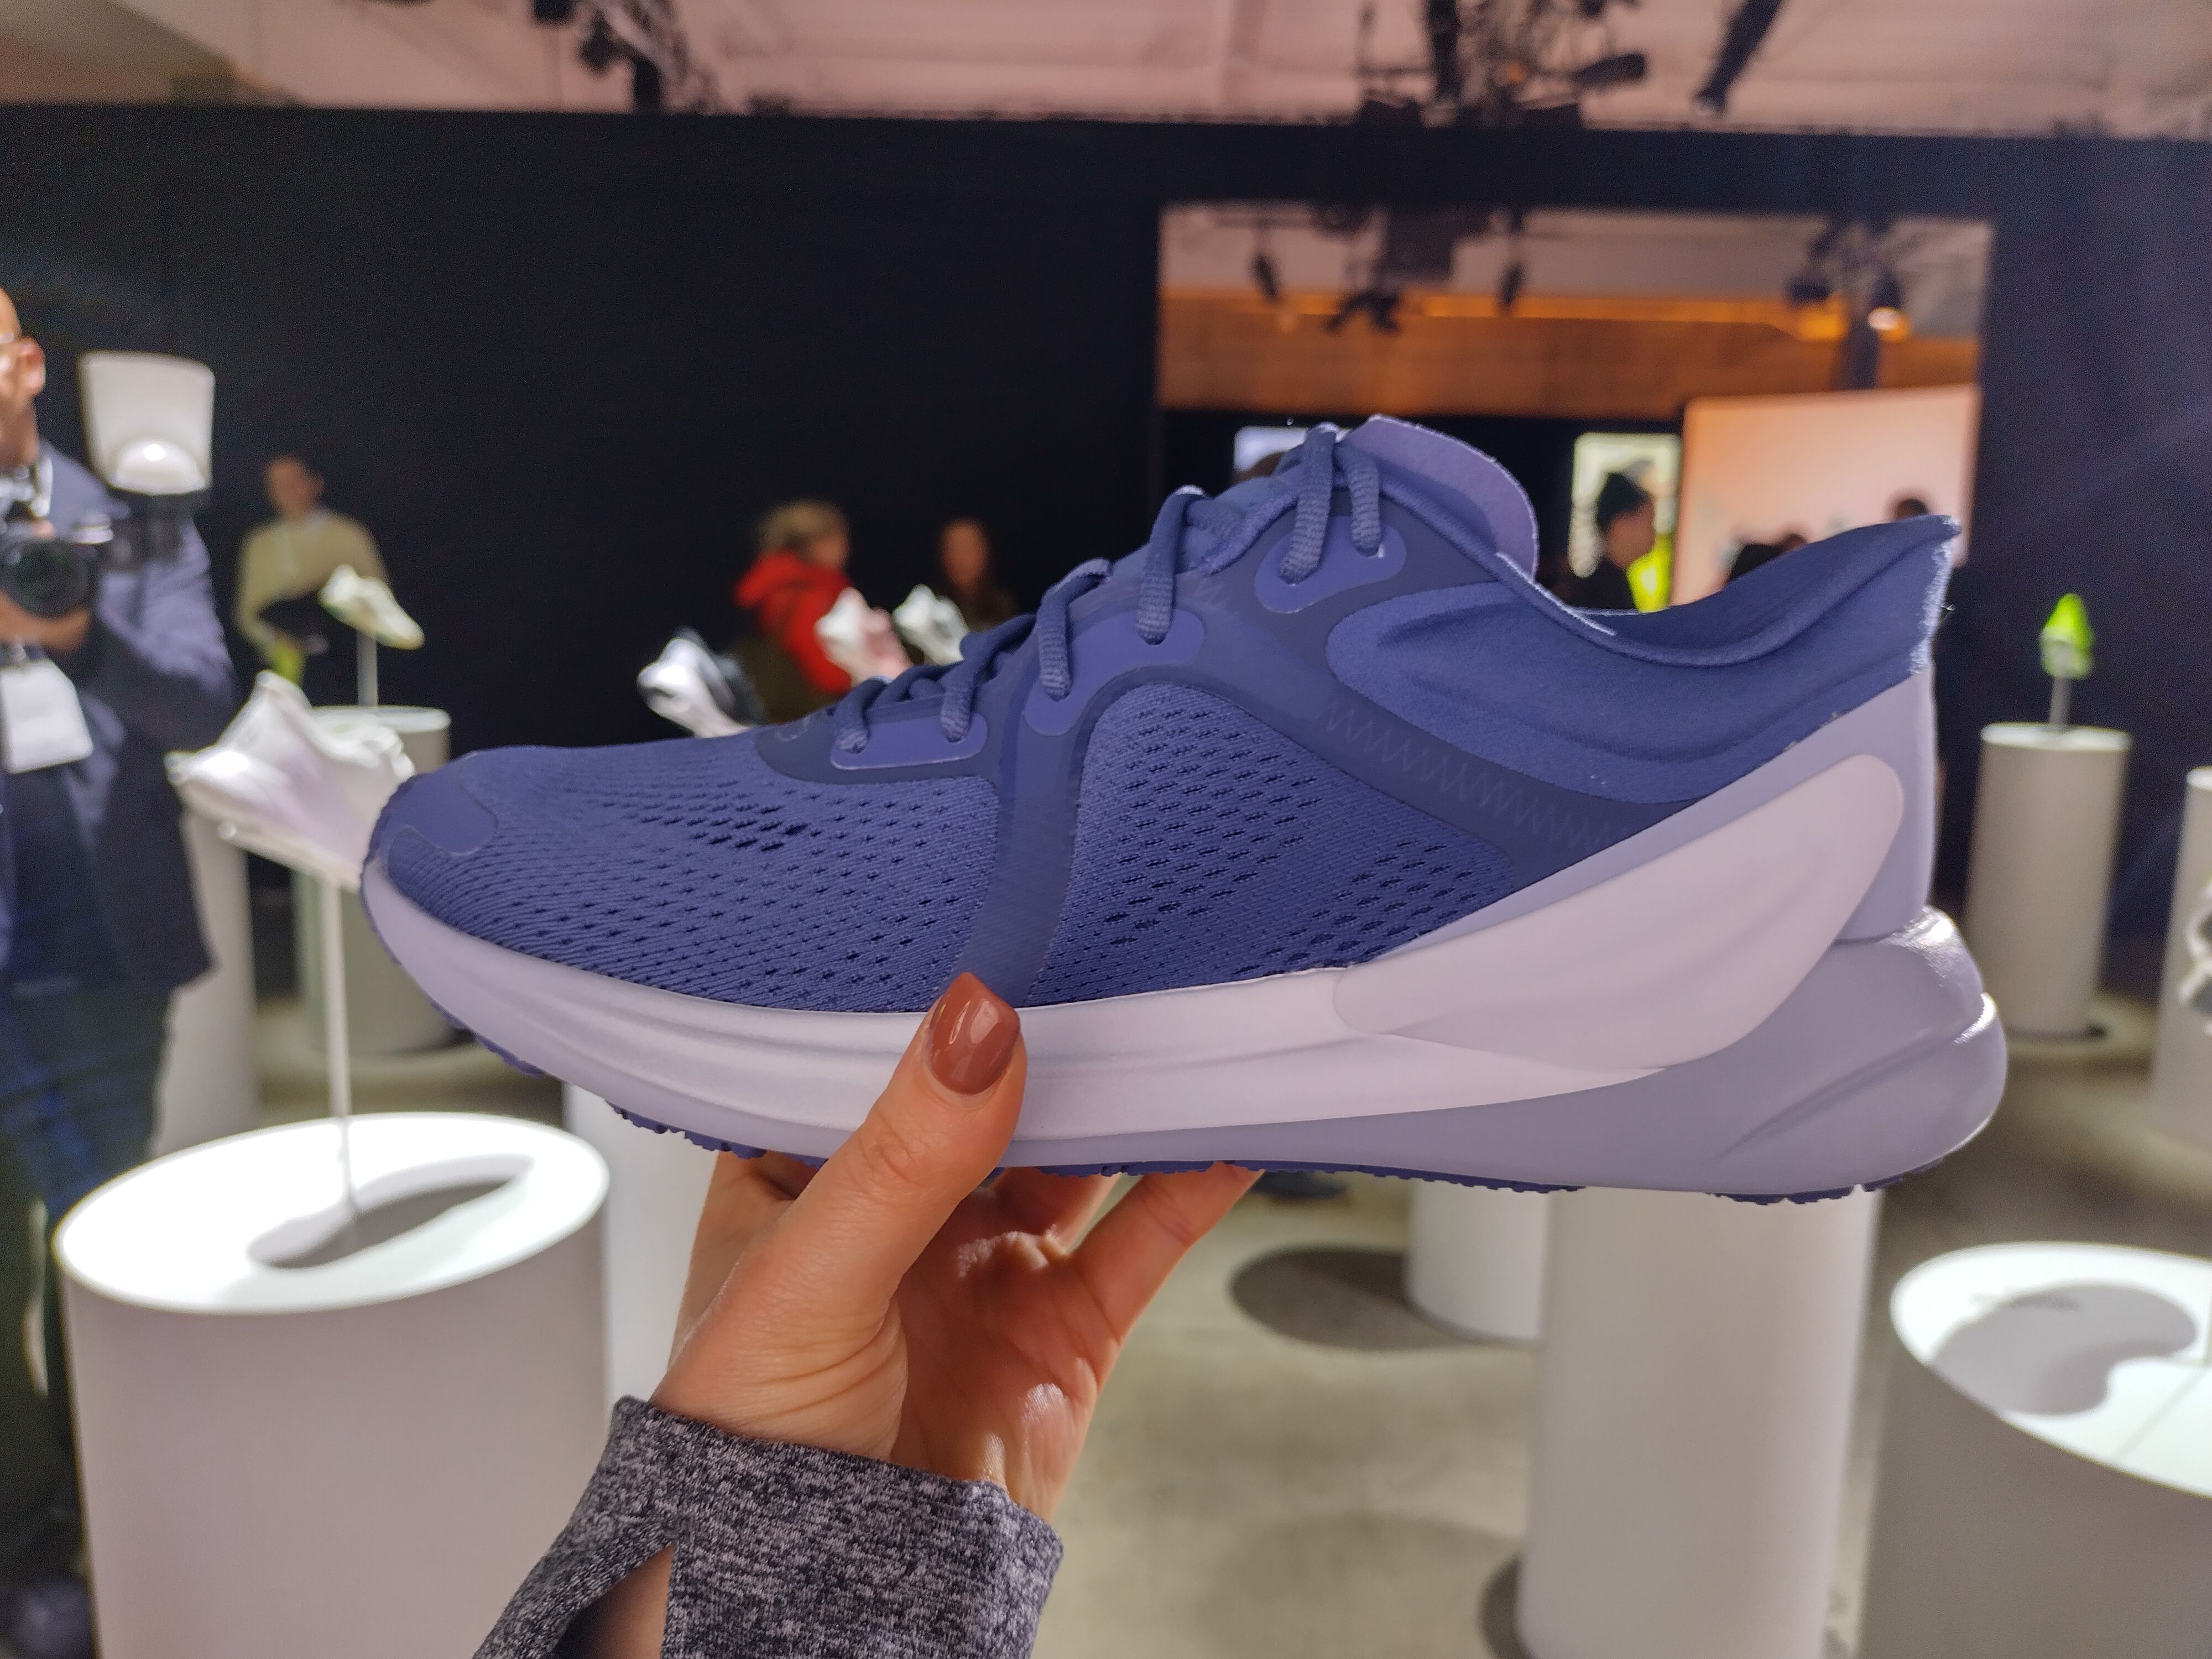 Lululemon Running Shoes Are Here: The Athletic Apparel Brand is Embracing  Footwear